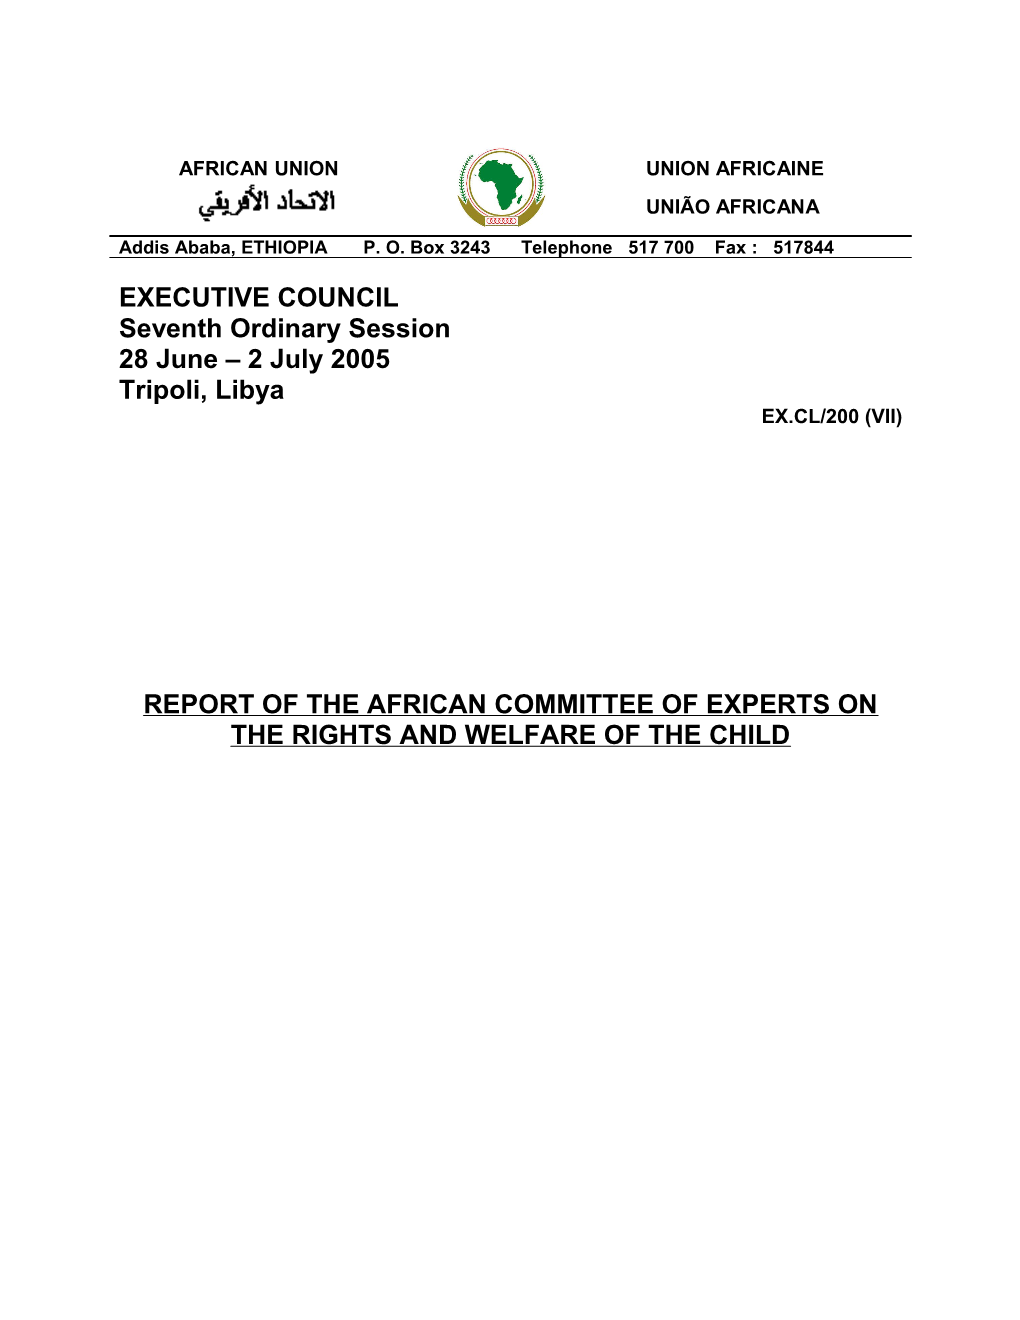 Report of the African Committee of Experts on the Rights and Welfare of the Child